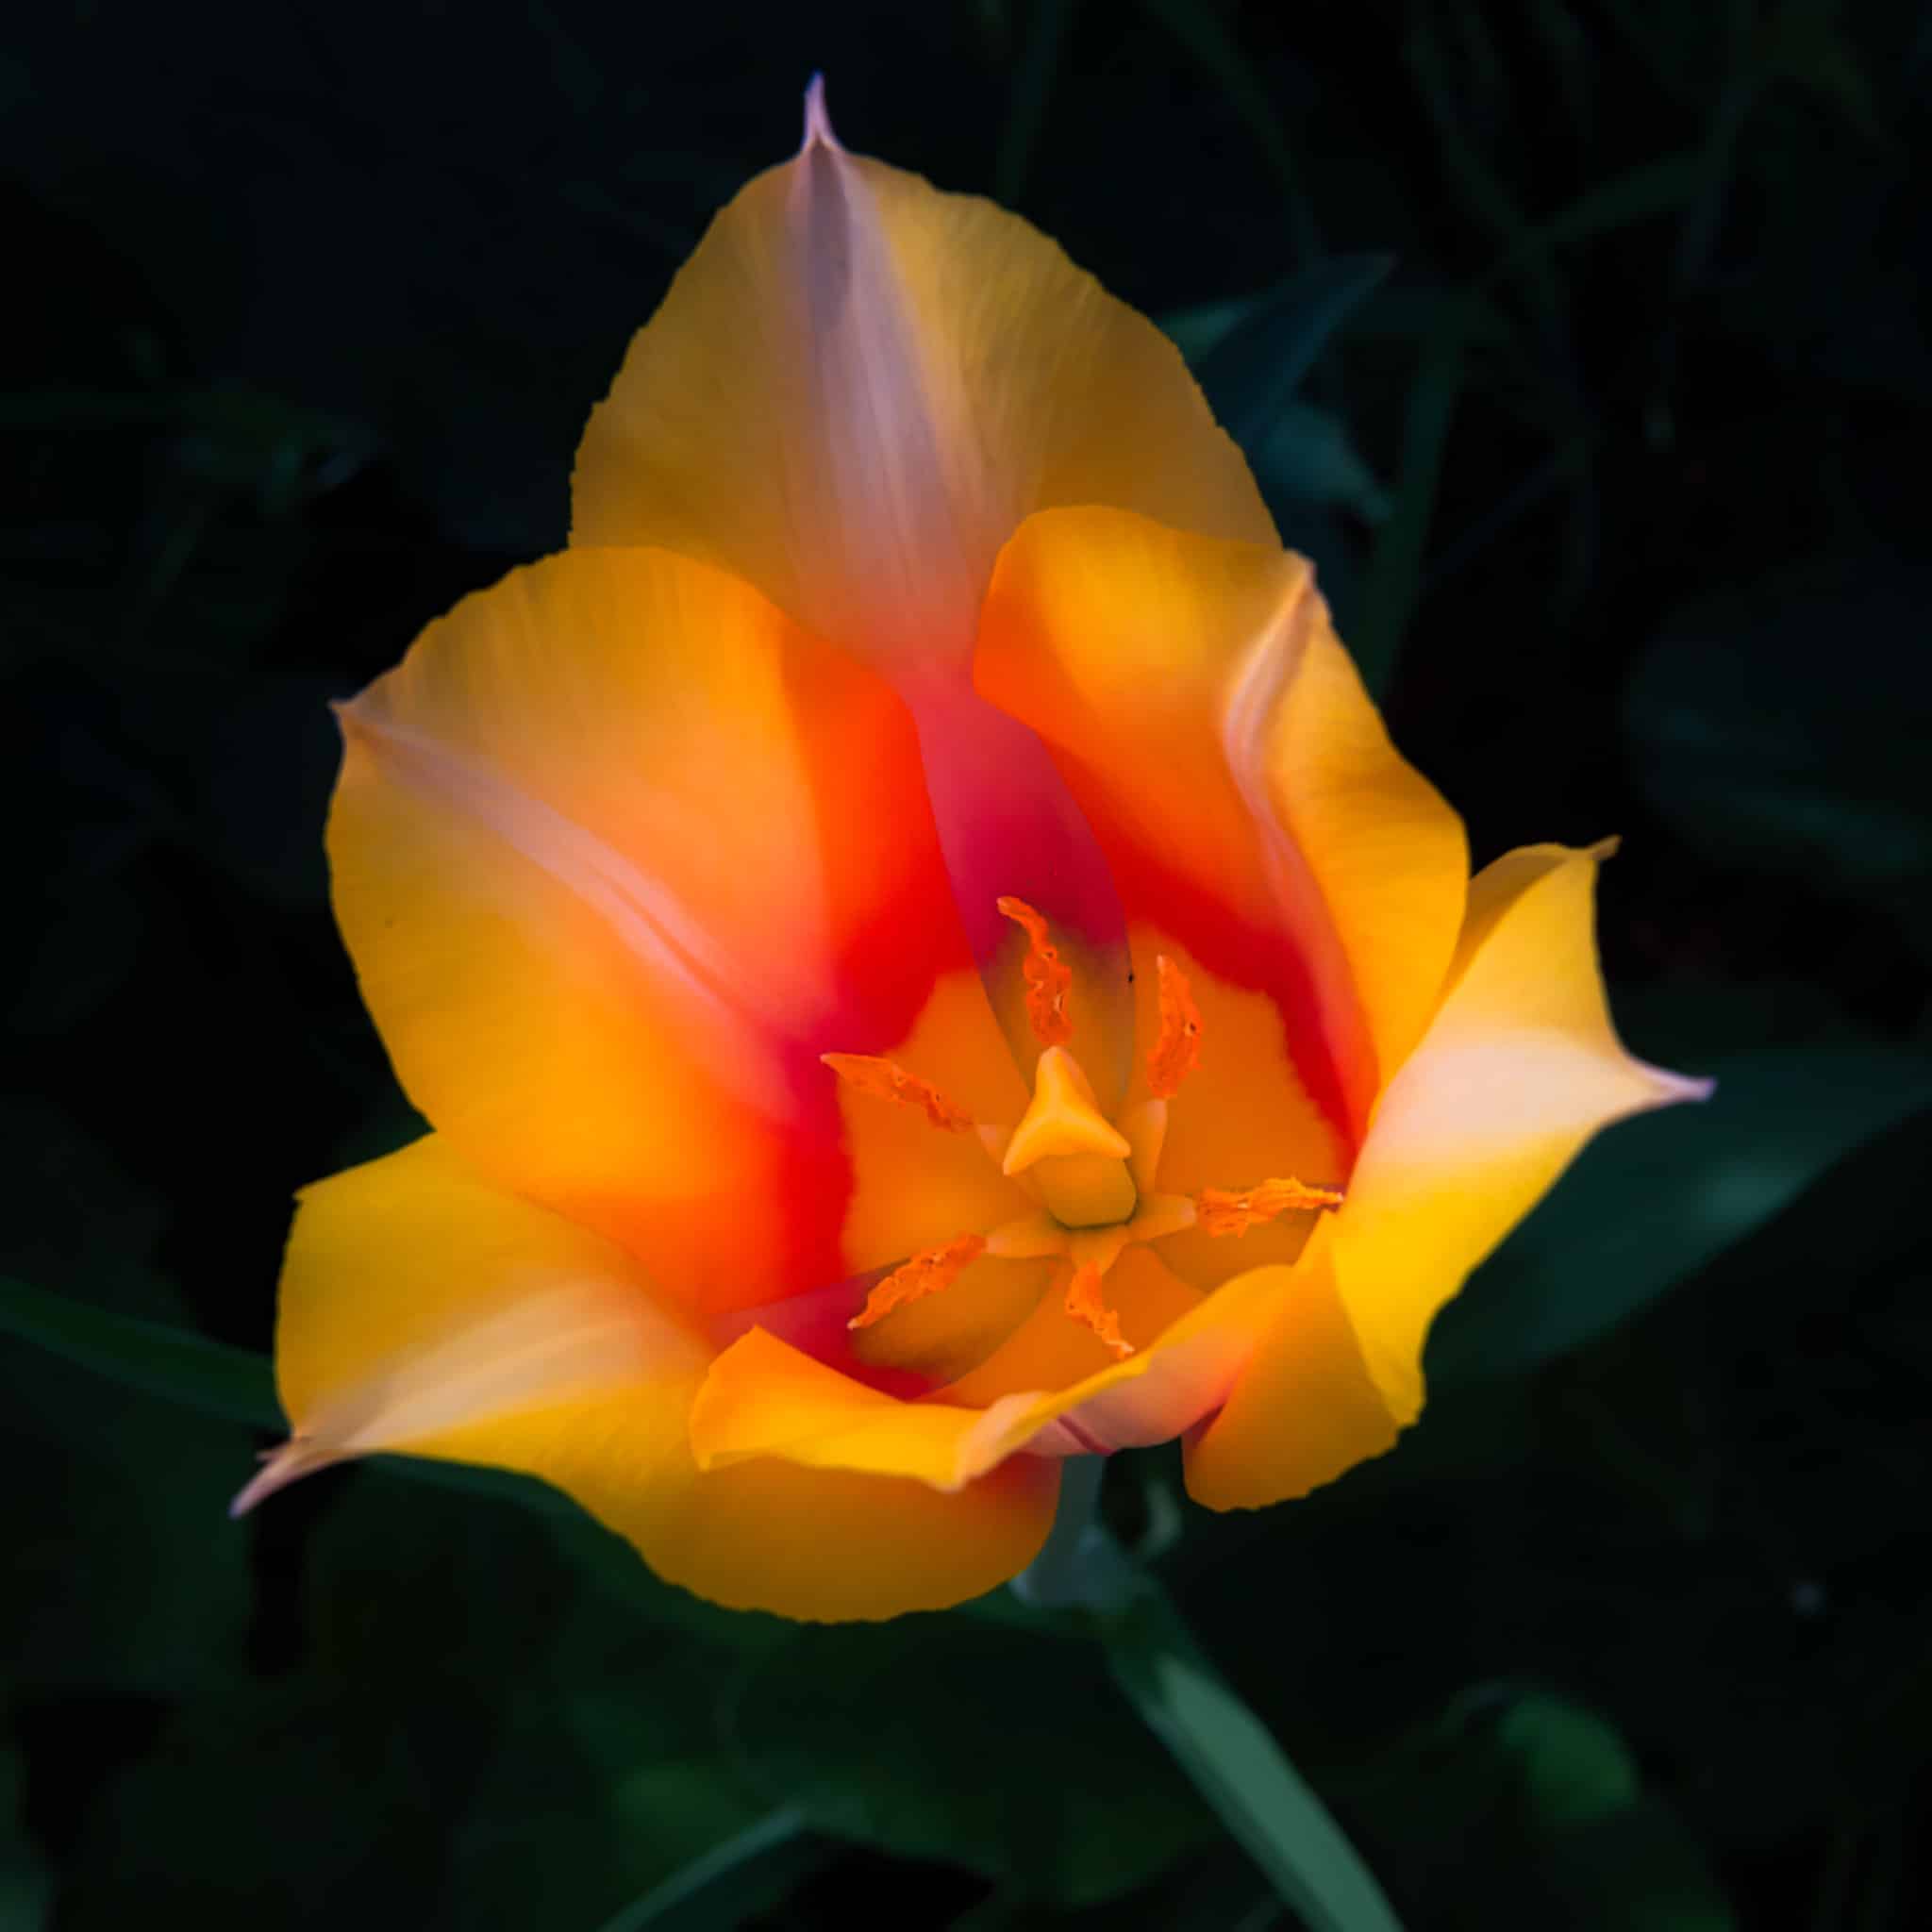 This yellow and peach-colored Dutch tulip catched the early morning spring light in Boulder, Colorado.